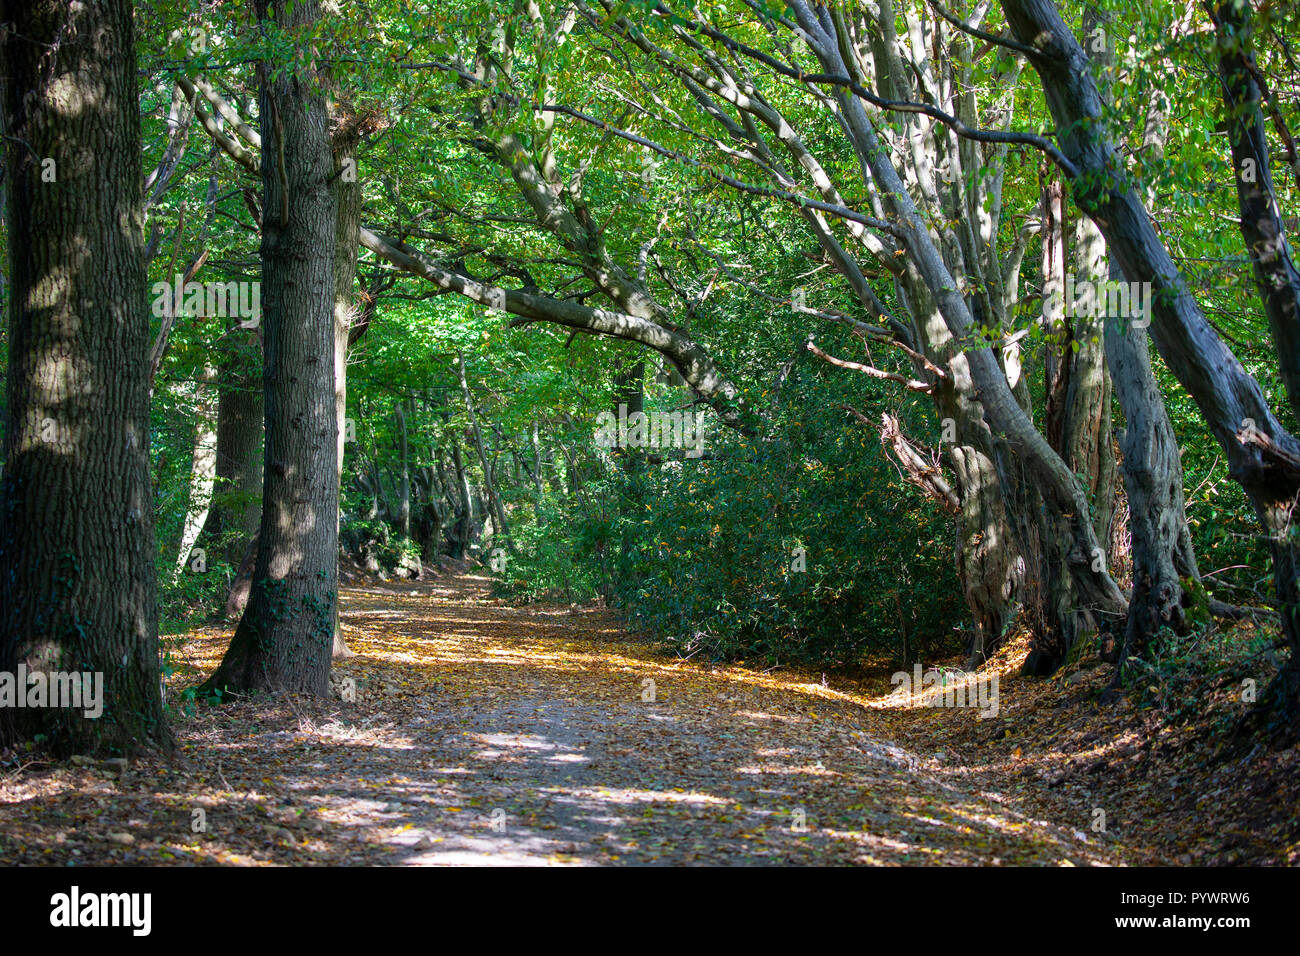 A public footpath under a Canopy of Autumn Wooded Walking Lanes, Near to Urban Development  at Burgess Hill West Sussex Stock Photo